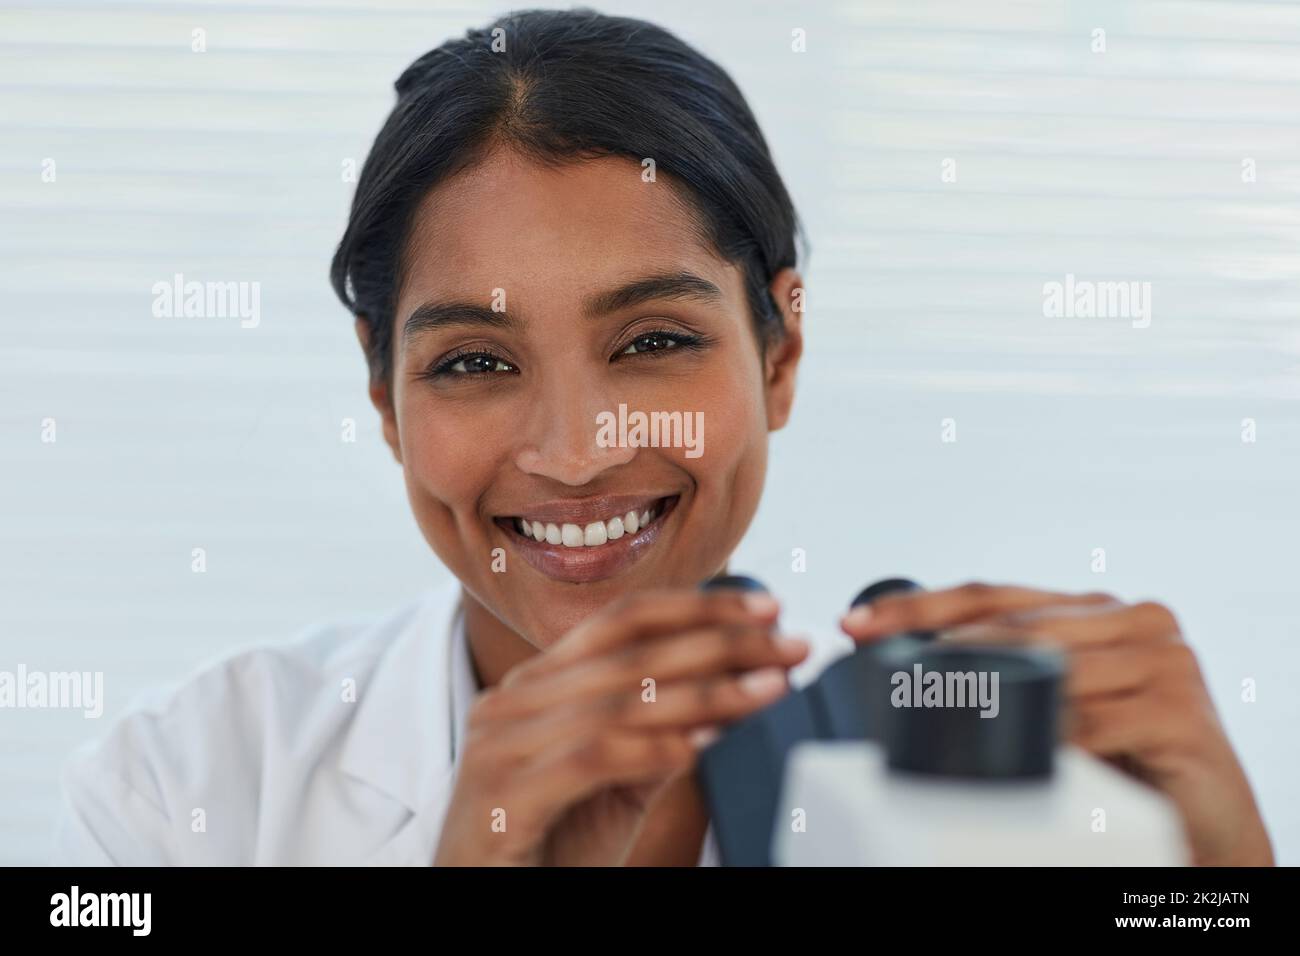 The answers are all in the details. Portrait of a young female scientist working in a lab. Stock Photo